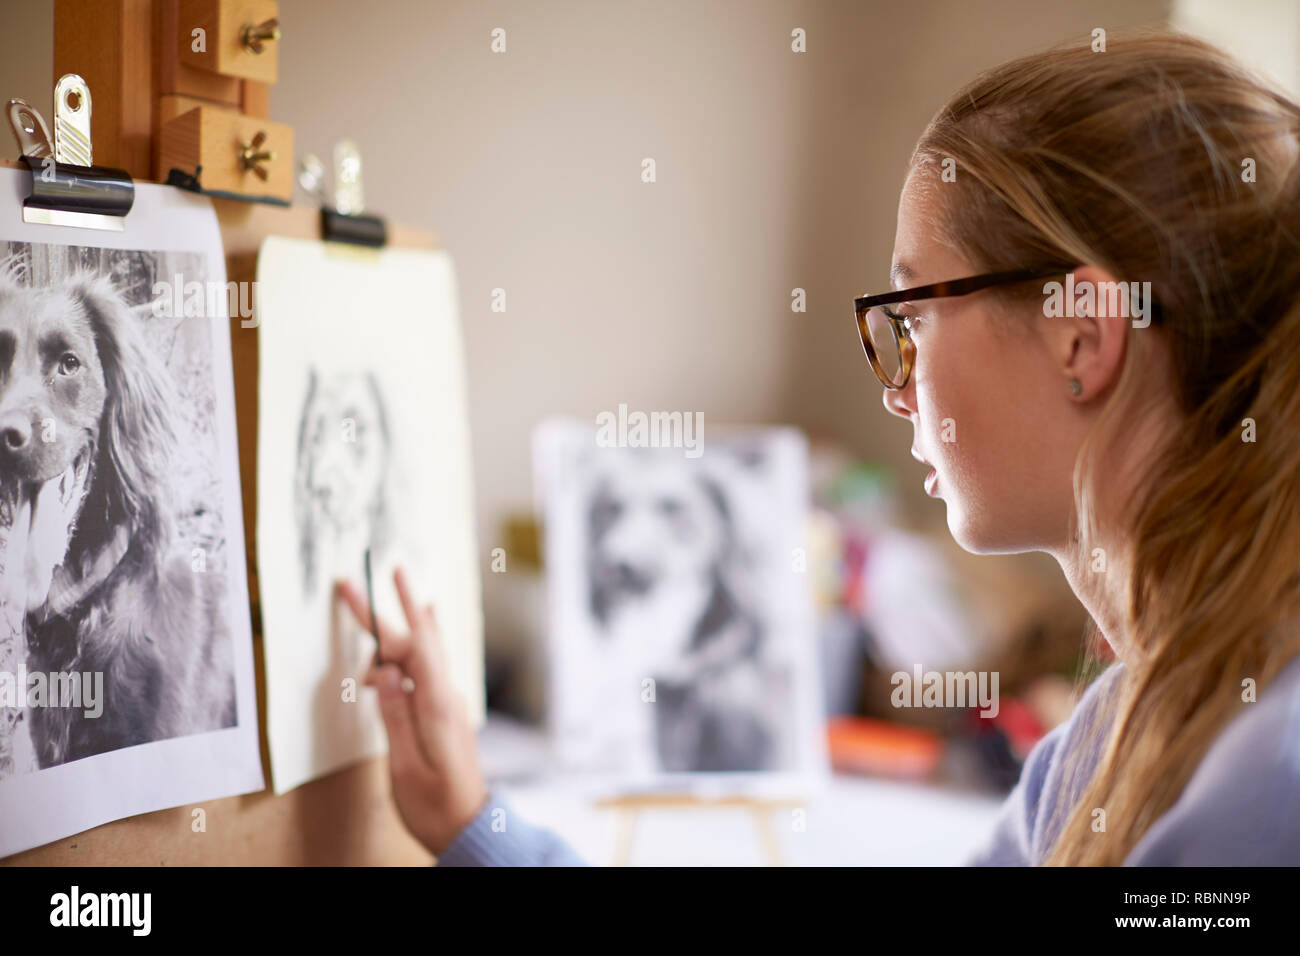 Side View Of Female Teenage Artist Sitting At Easel Drawing Picture Of Dog From Photograph In Charcoal Stock Photo